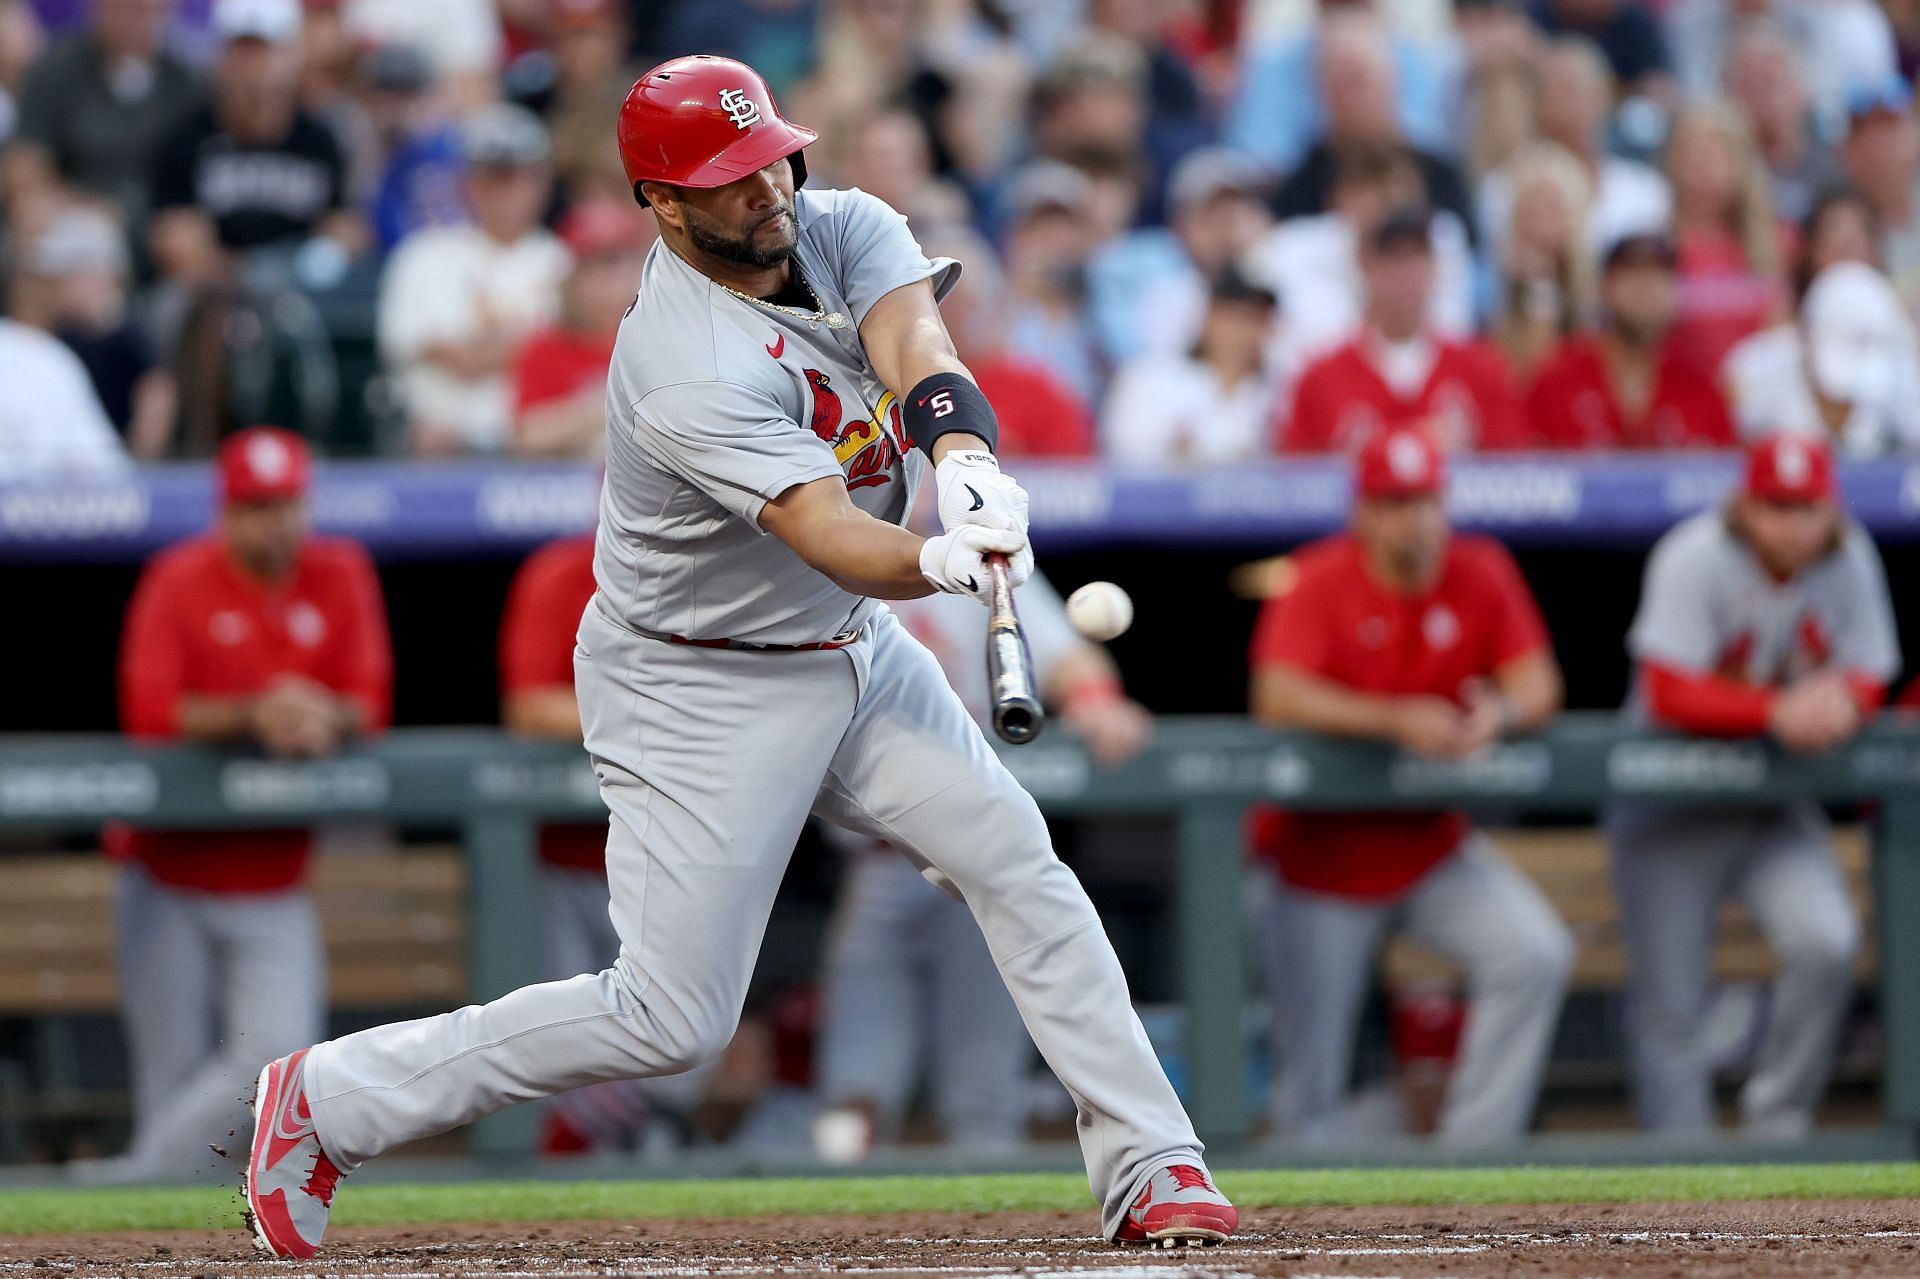 Pujols swinging for the fences